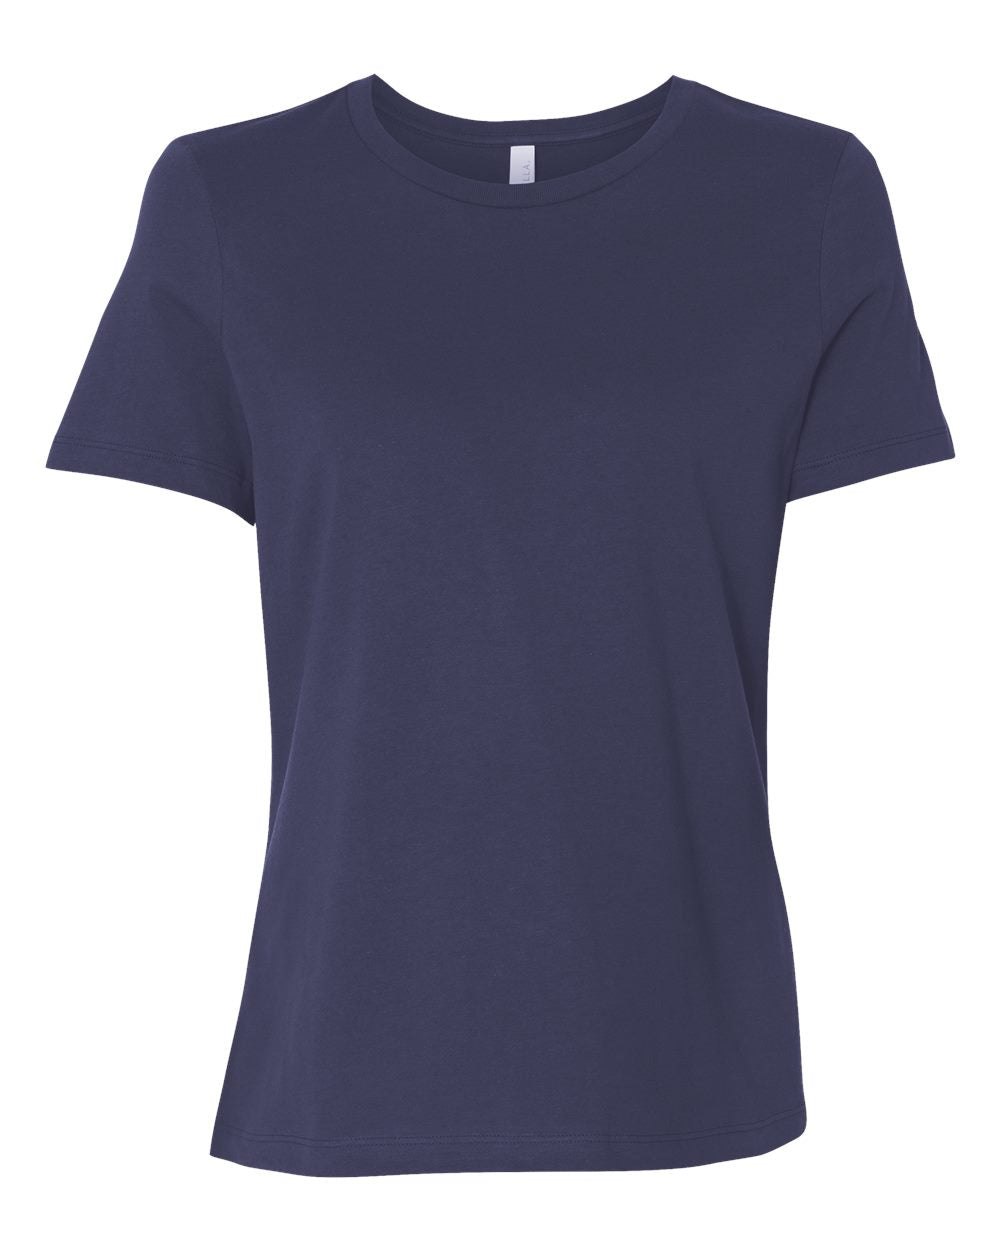 Ladies Relaxed Short Sleeve Jersey Tee